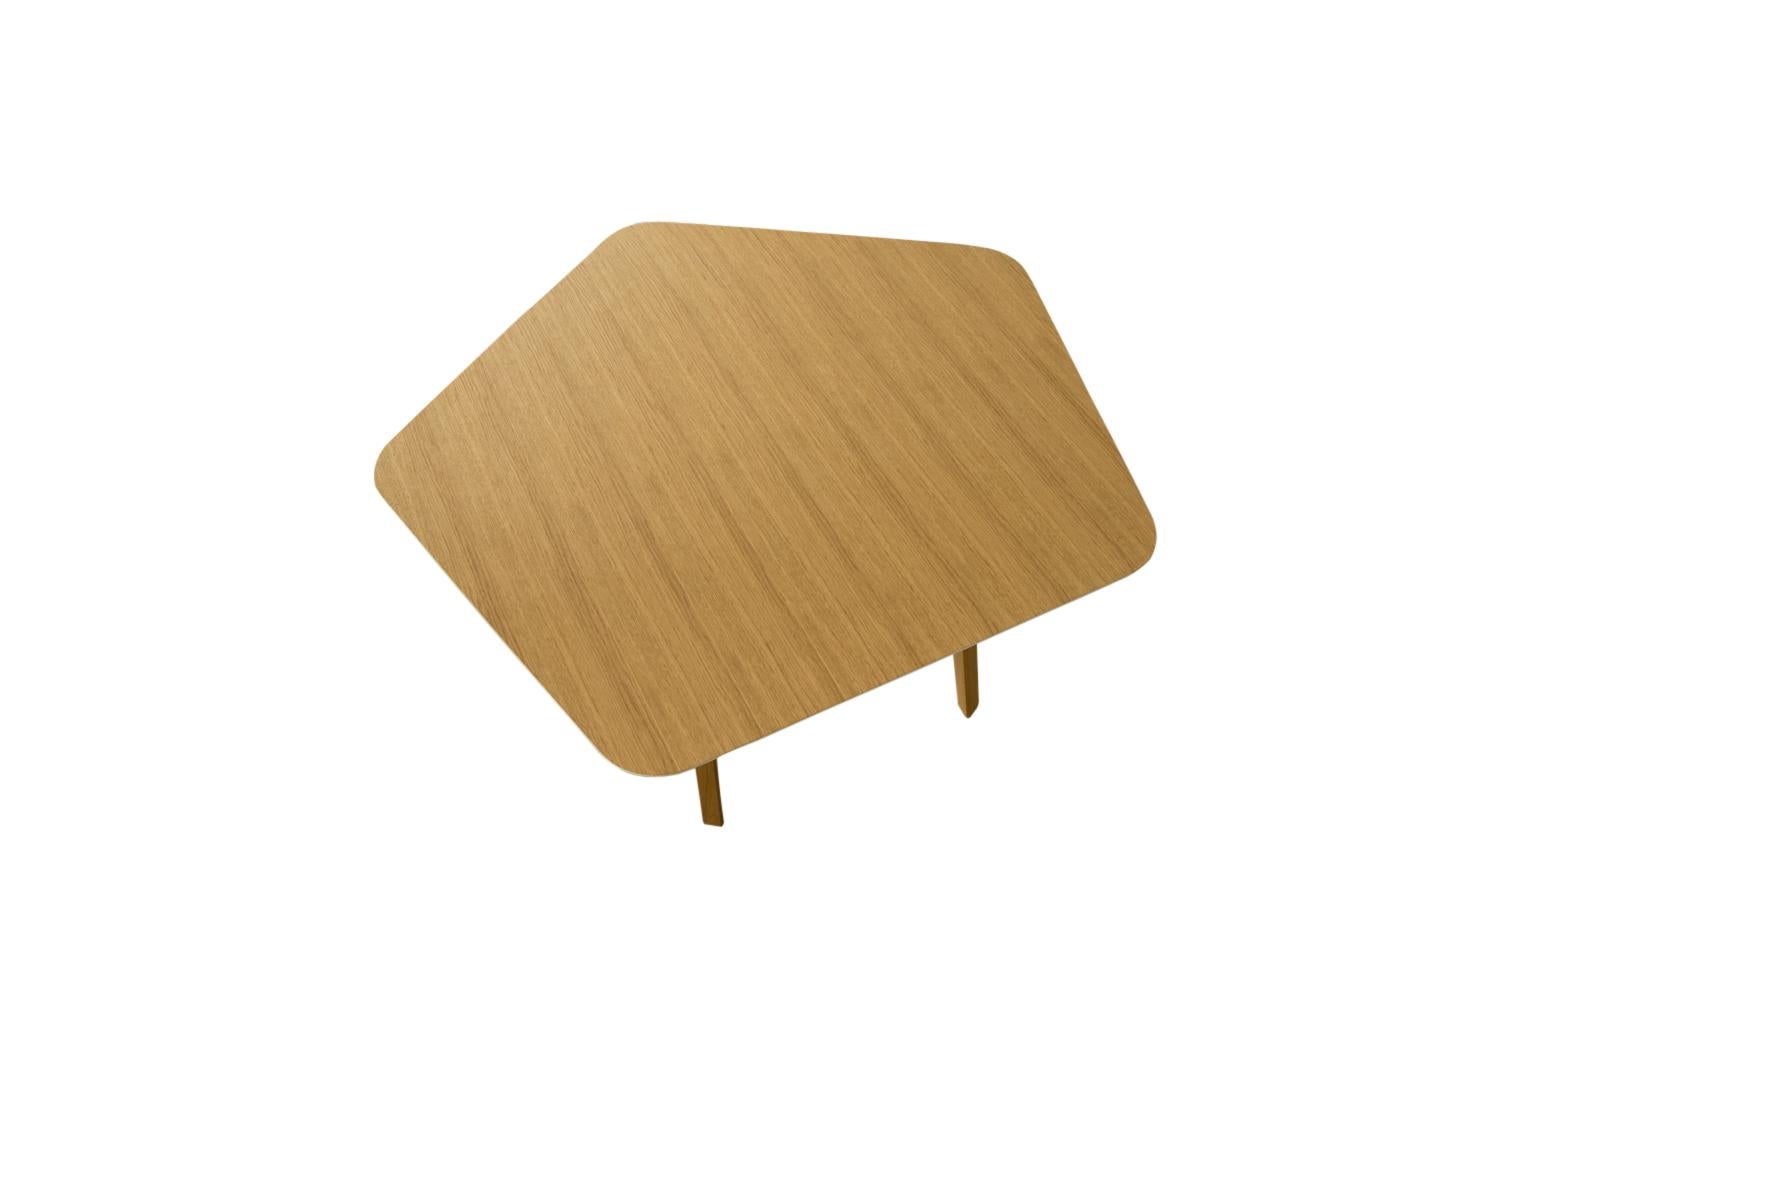 Tria Penta Table by Colé Italia with Lorenz + Kaz, 2012
Dimensions: H.75; Pentagonal top ø 140
Materials: Veneered, lacquered or ceramic top with rounded corners, accordingly lacquered on the back. 5 solid oak Legs. (Custom size top available upon